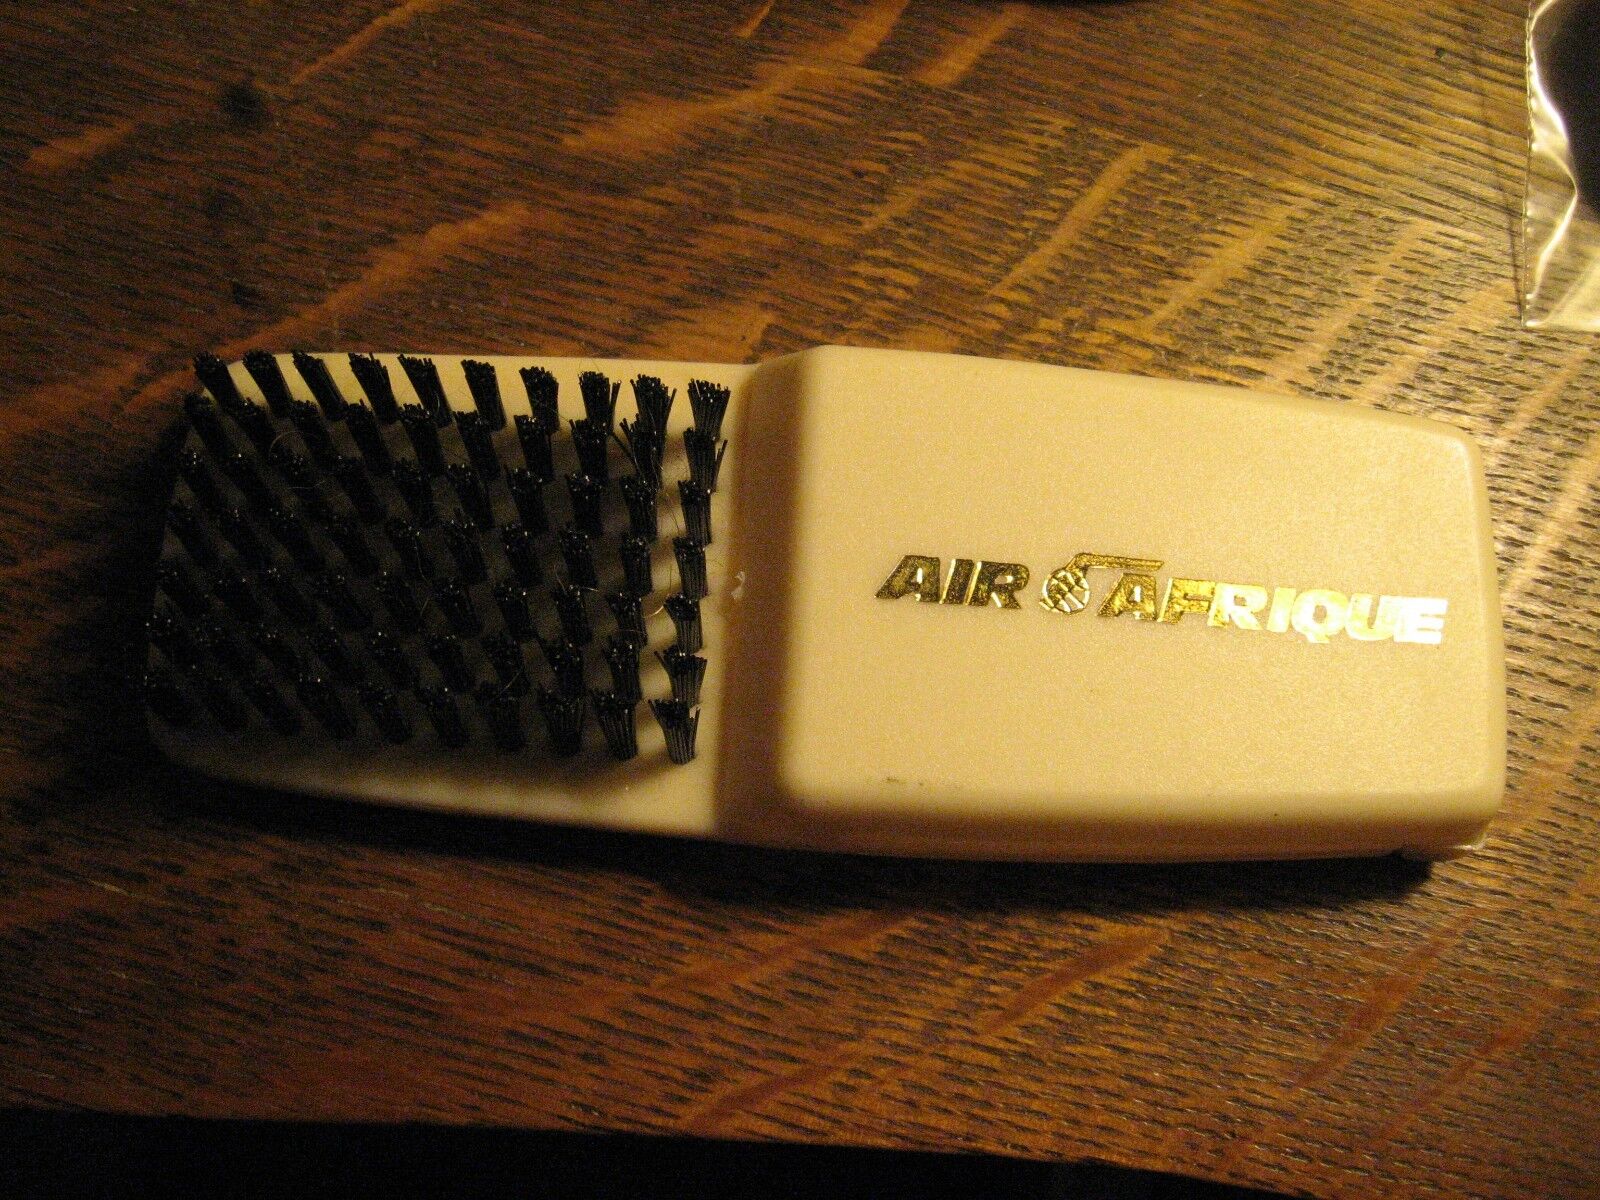 Air Afrique African Airlines Vintage First Class Airplane Amenity Shoe Brush